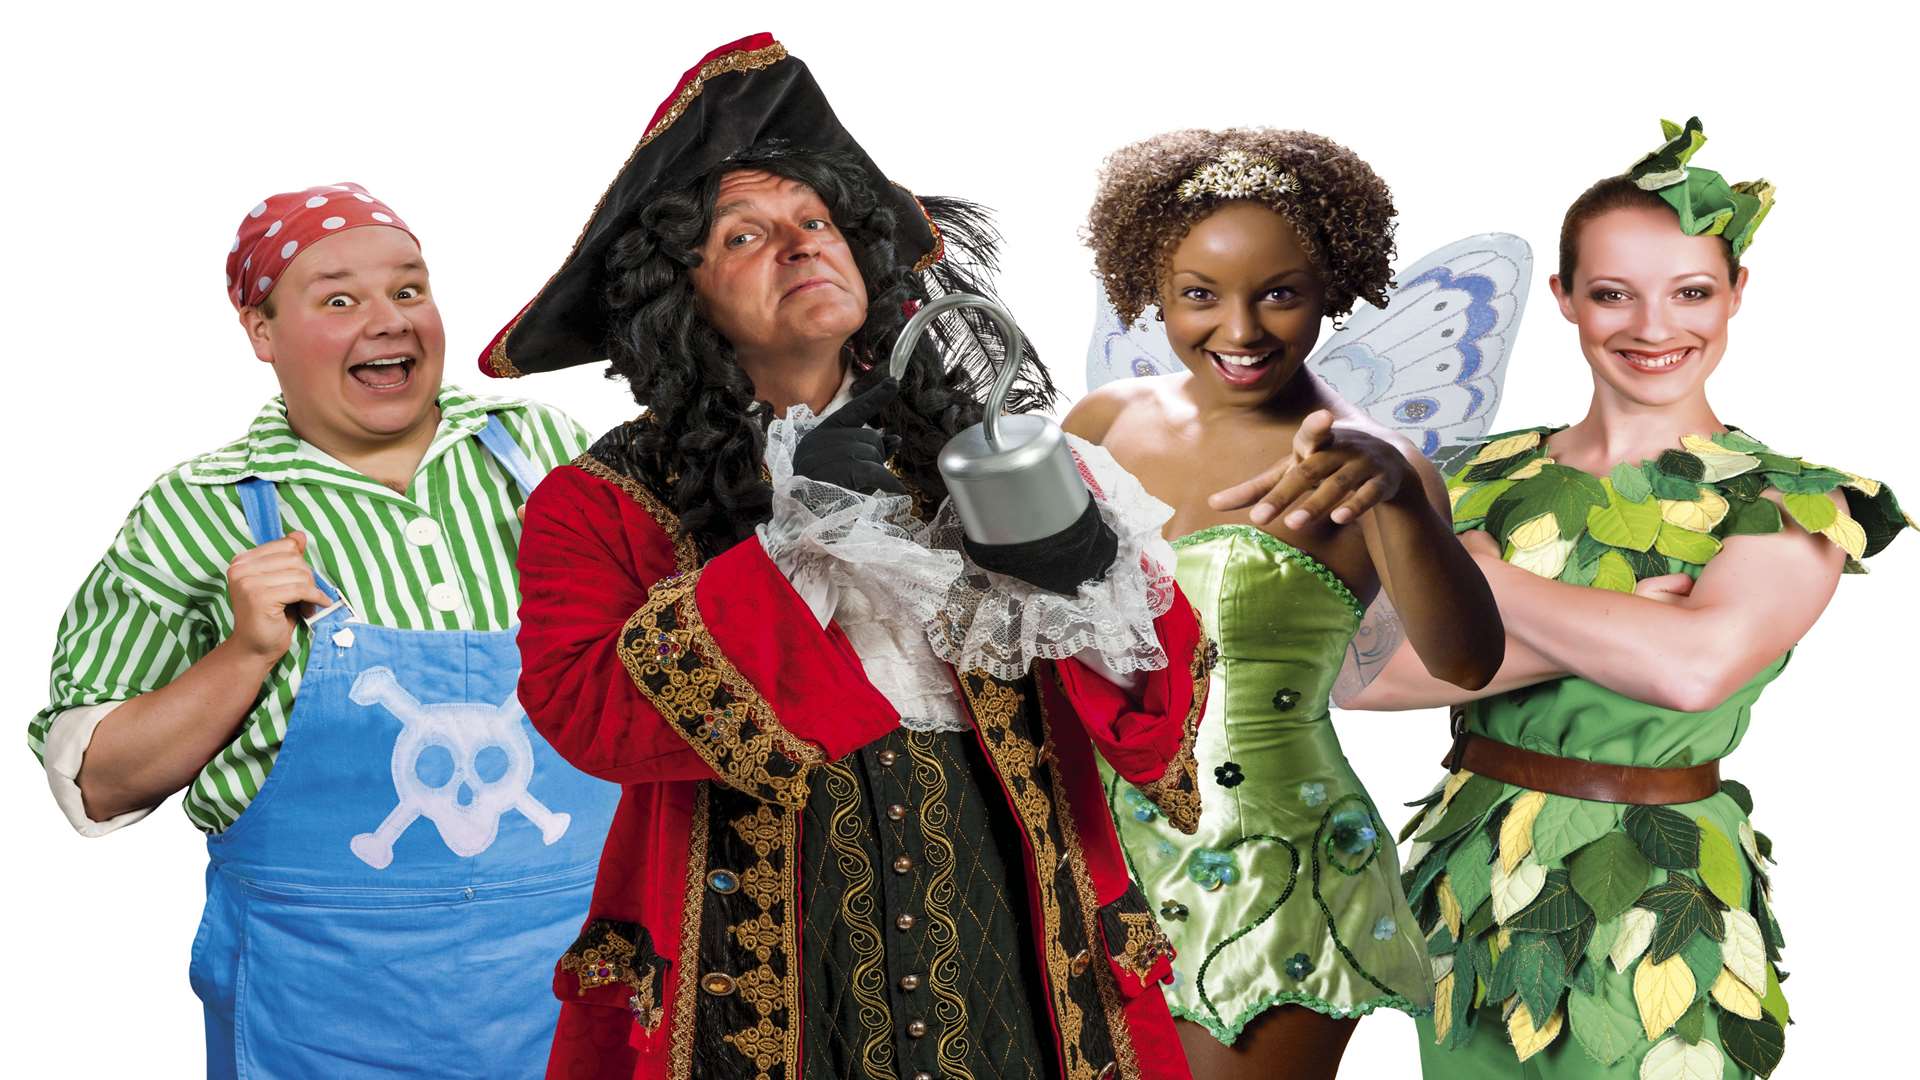 All the stops have been pulled out for this year’s pantomime in Tunbridge Wells